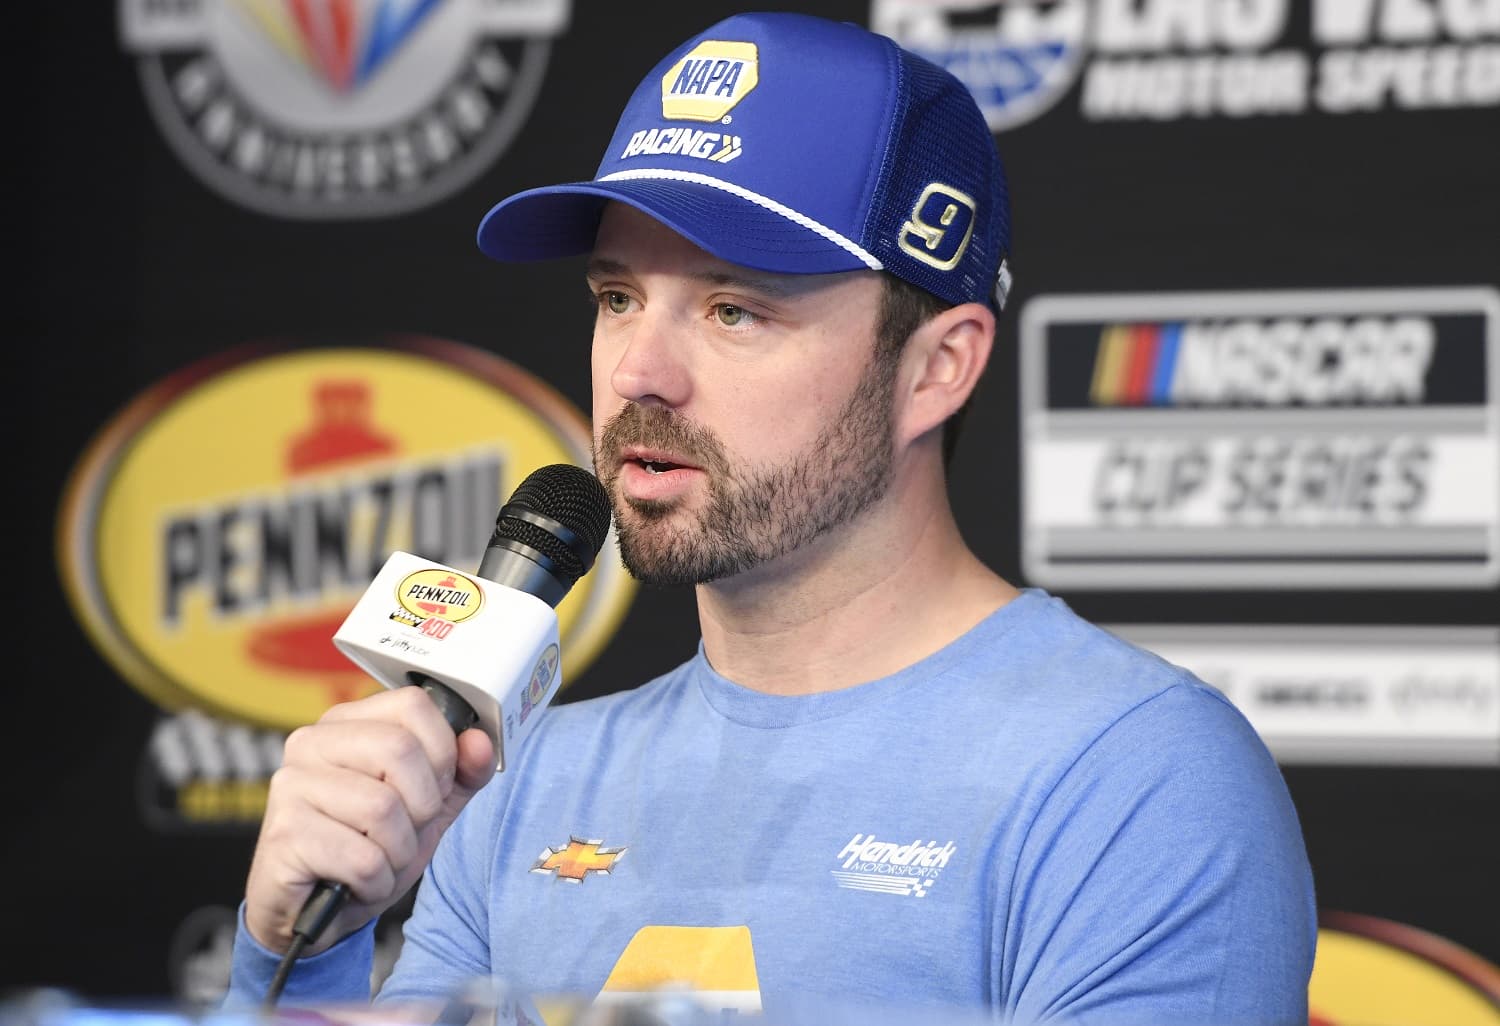 Josh Berry addresses the media before practice for the NASCAR Cup Series Pennzoil 400 on March 4, 2023, at Las Vegas Motor Speedway. | Michael Allio/Icon Sportswire via Getty Images